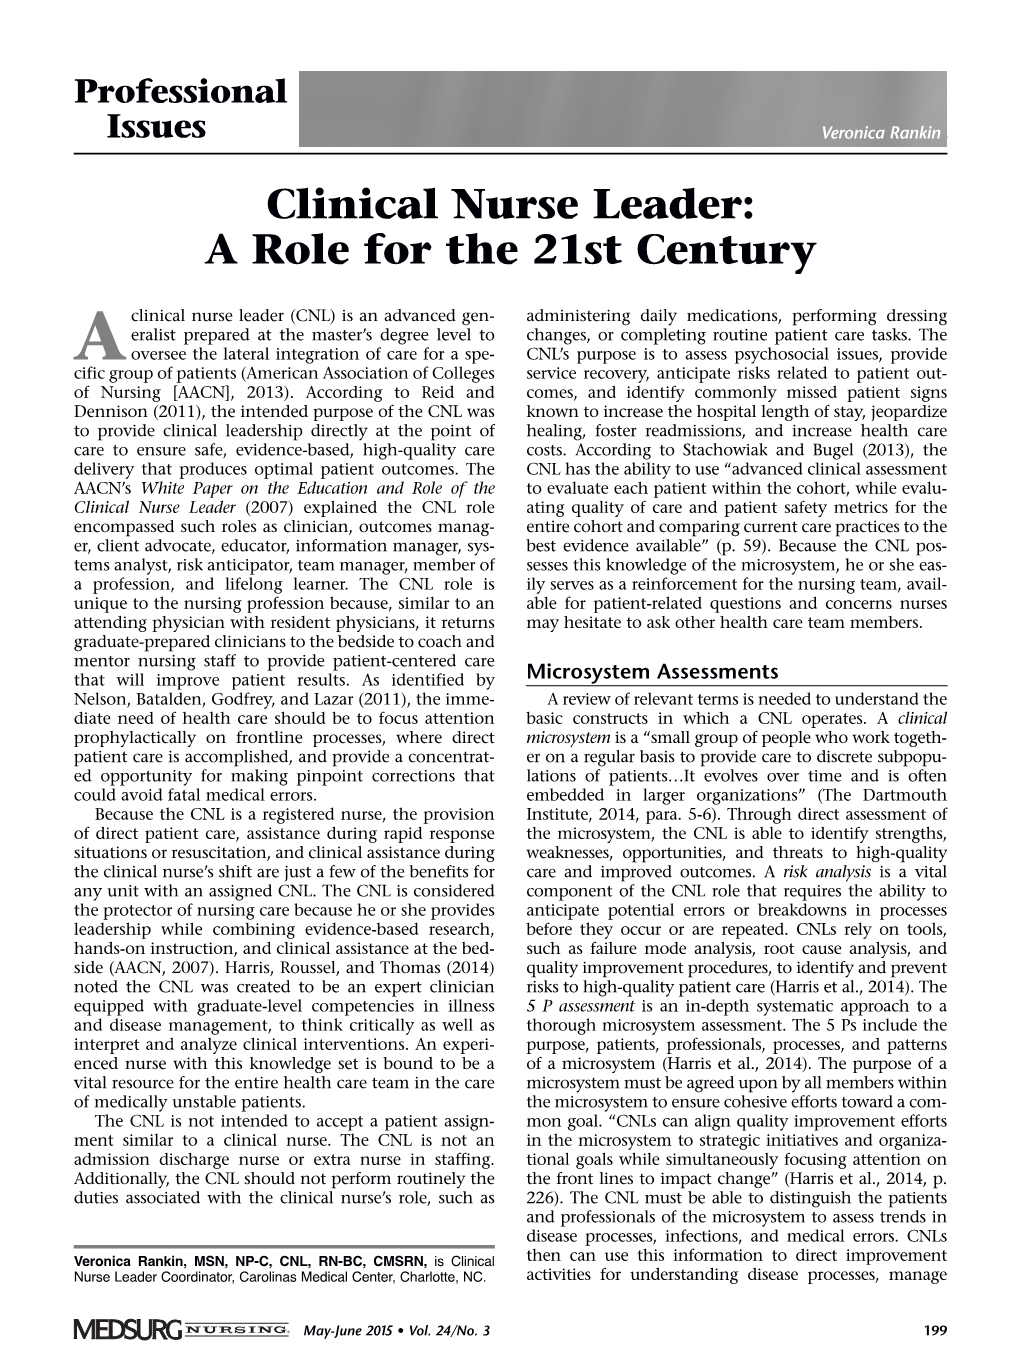 Clinical Nurse Leader: a Role for the 21St Century